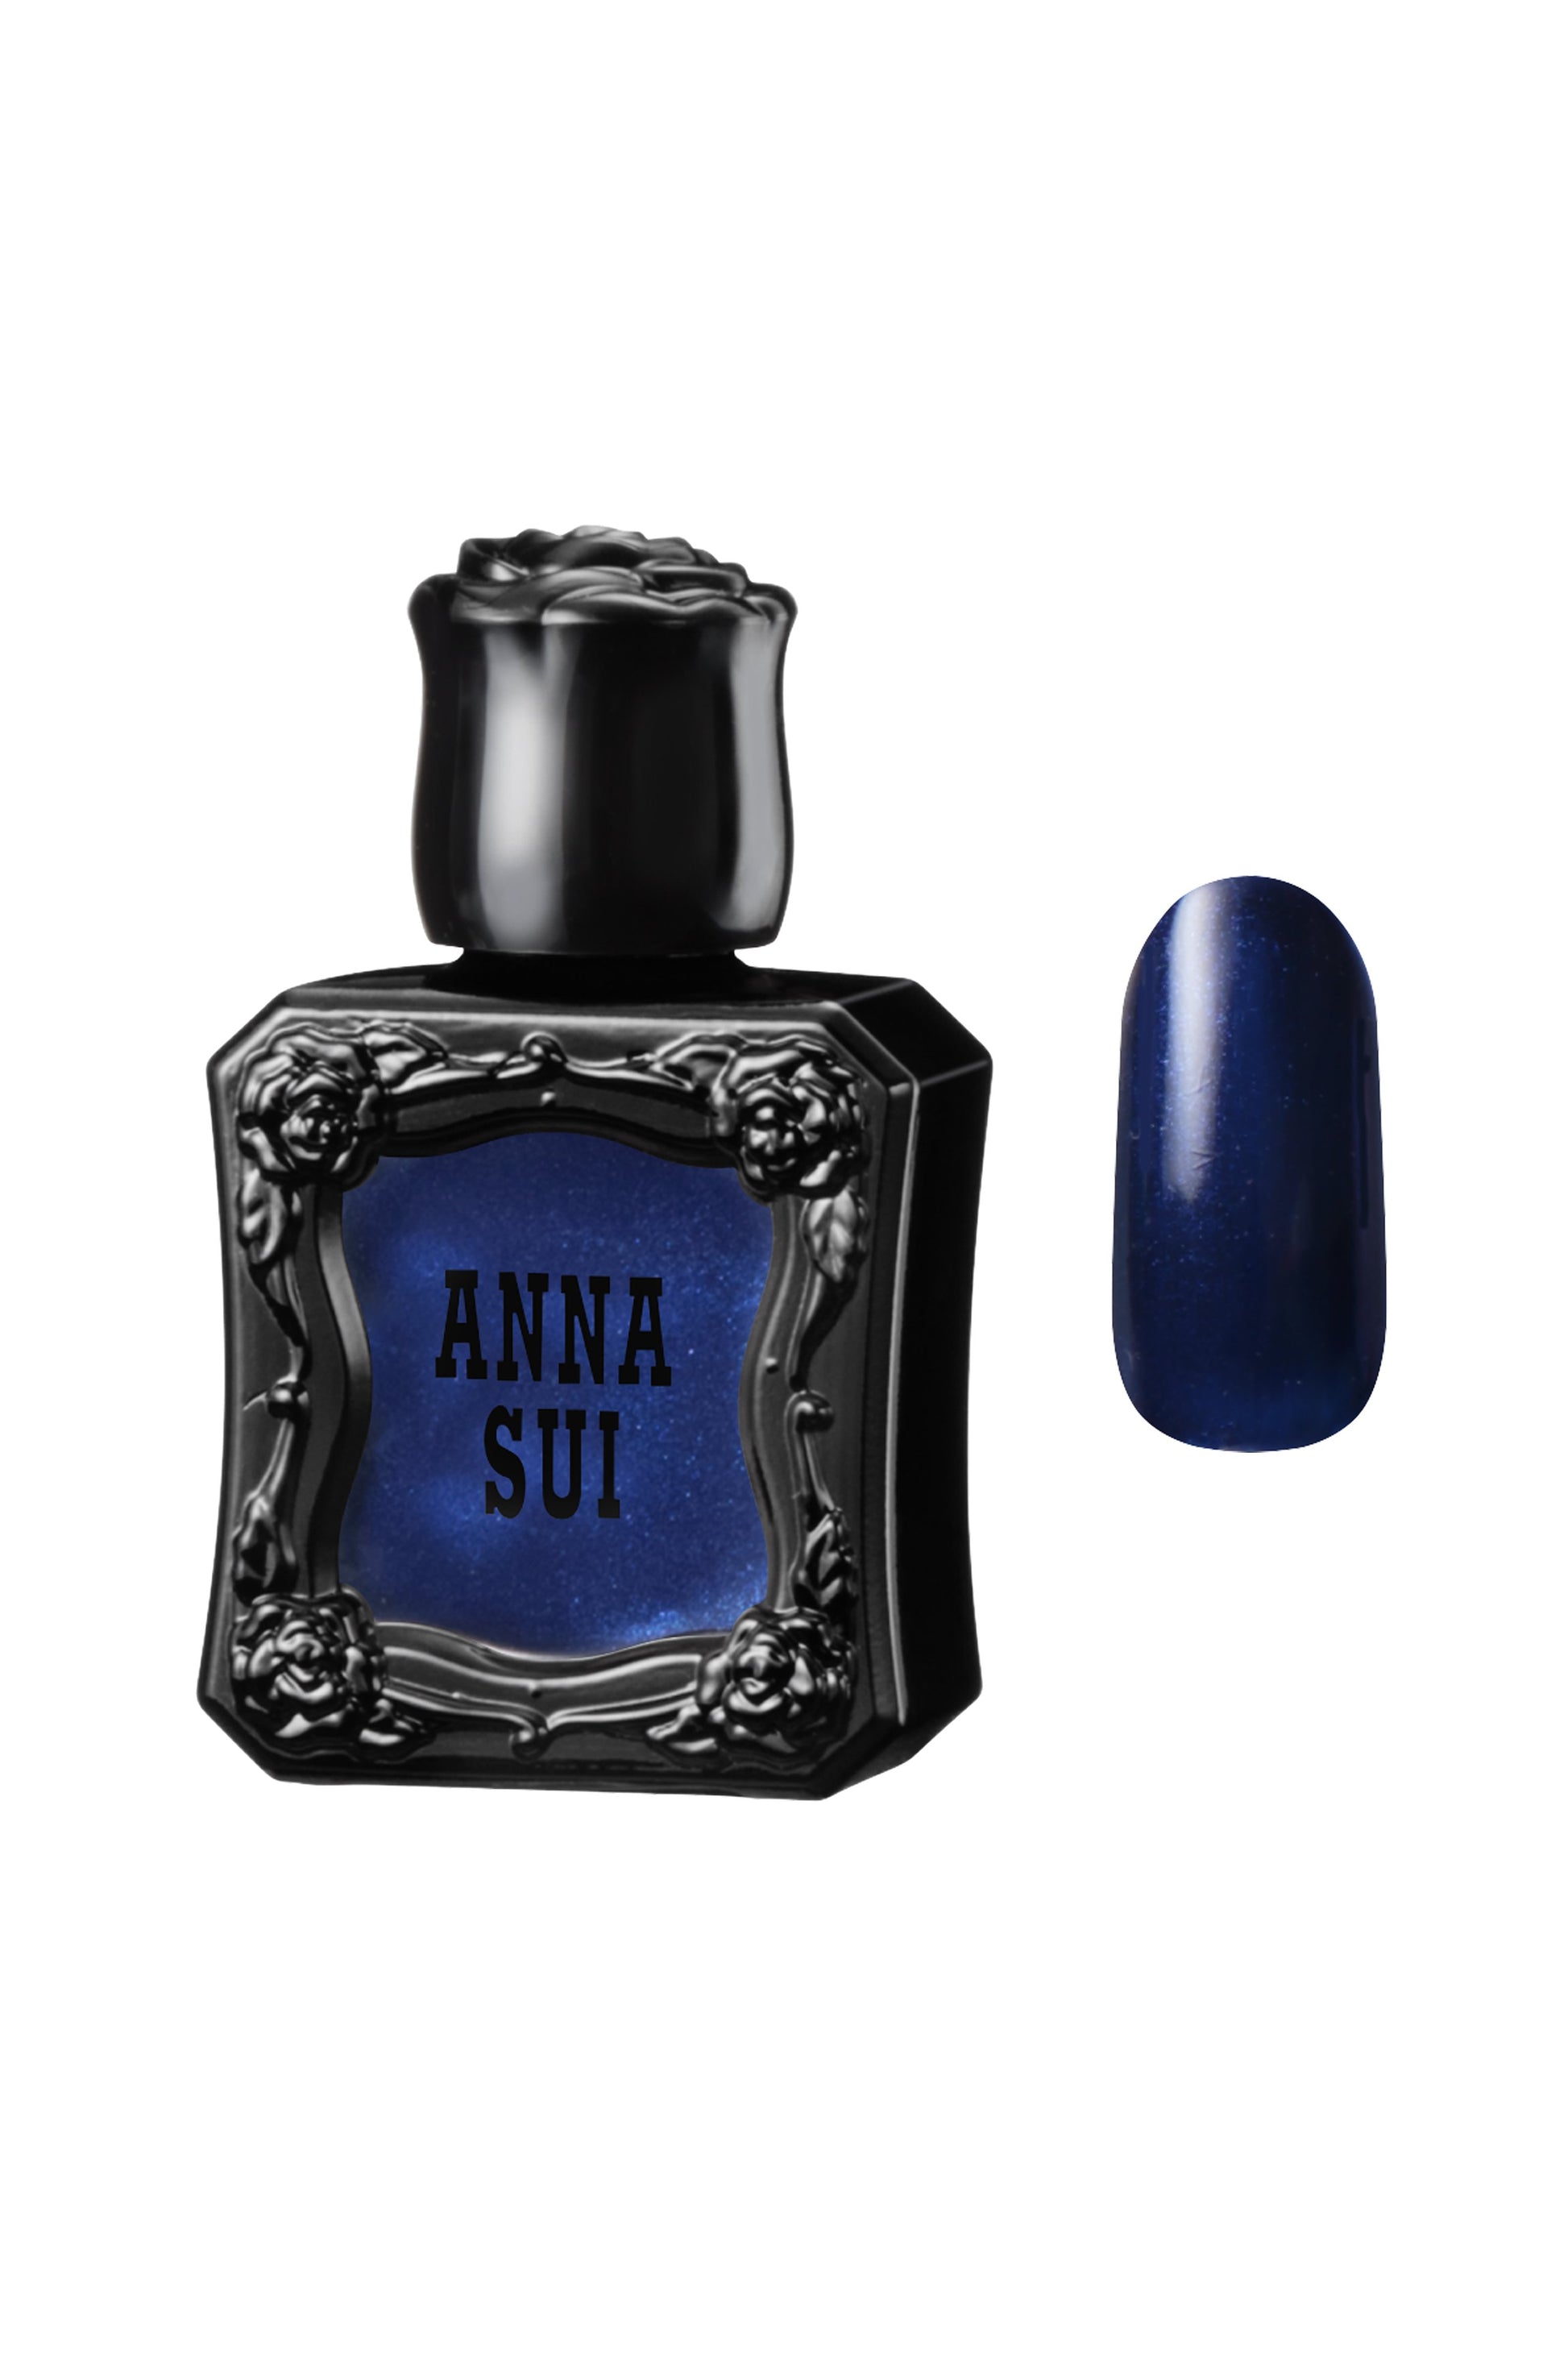 SHEER NAVY Nail Polish bottles raised rose pattern, Anna Sui in black over nail colors in bottle front